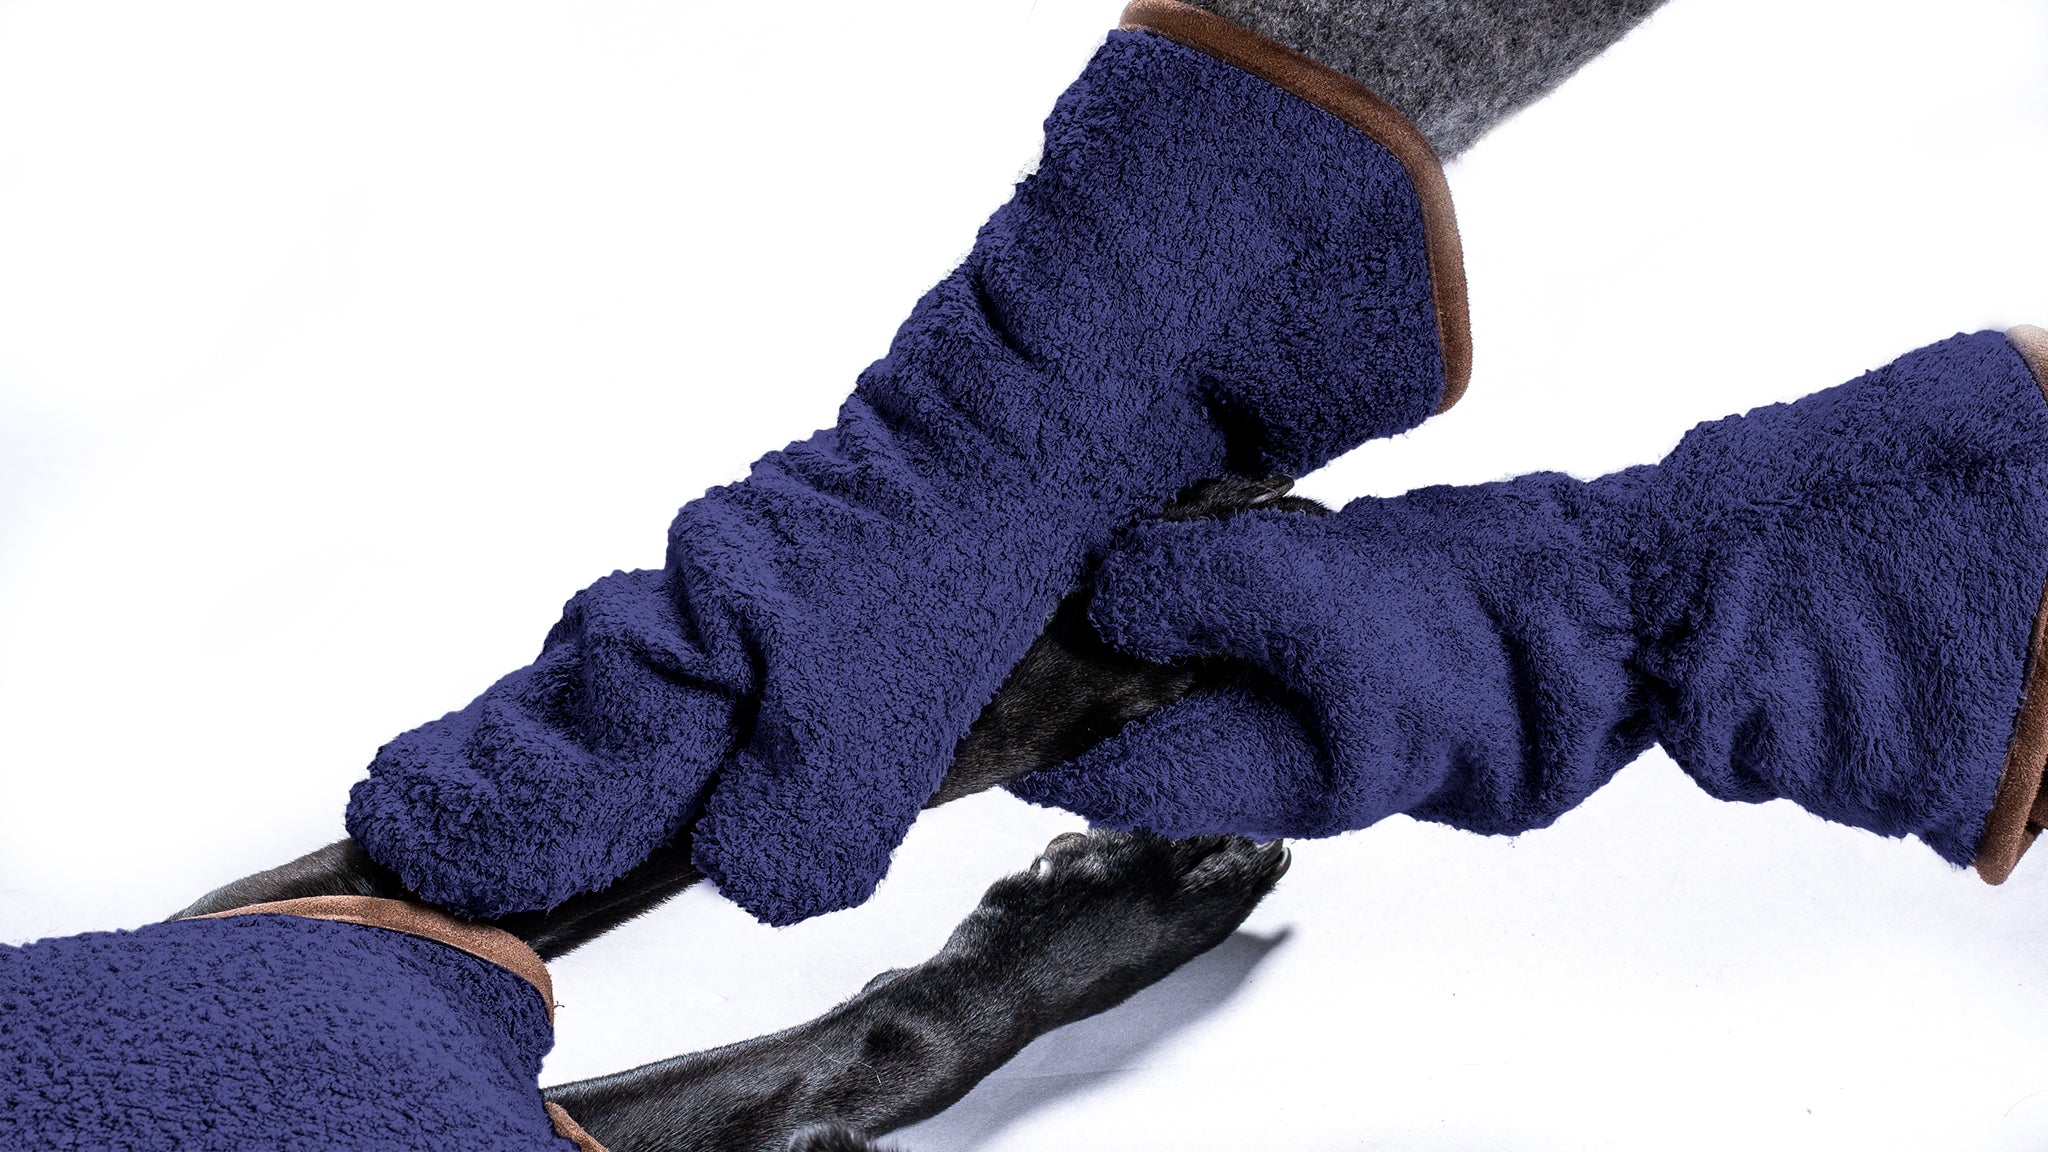 Black Labrador having its paws dried with a pair of navy blue dog drying mitts.